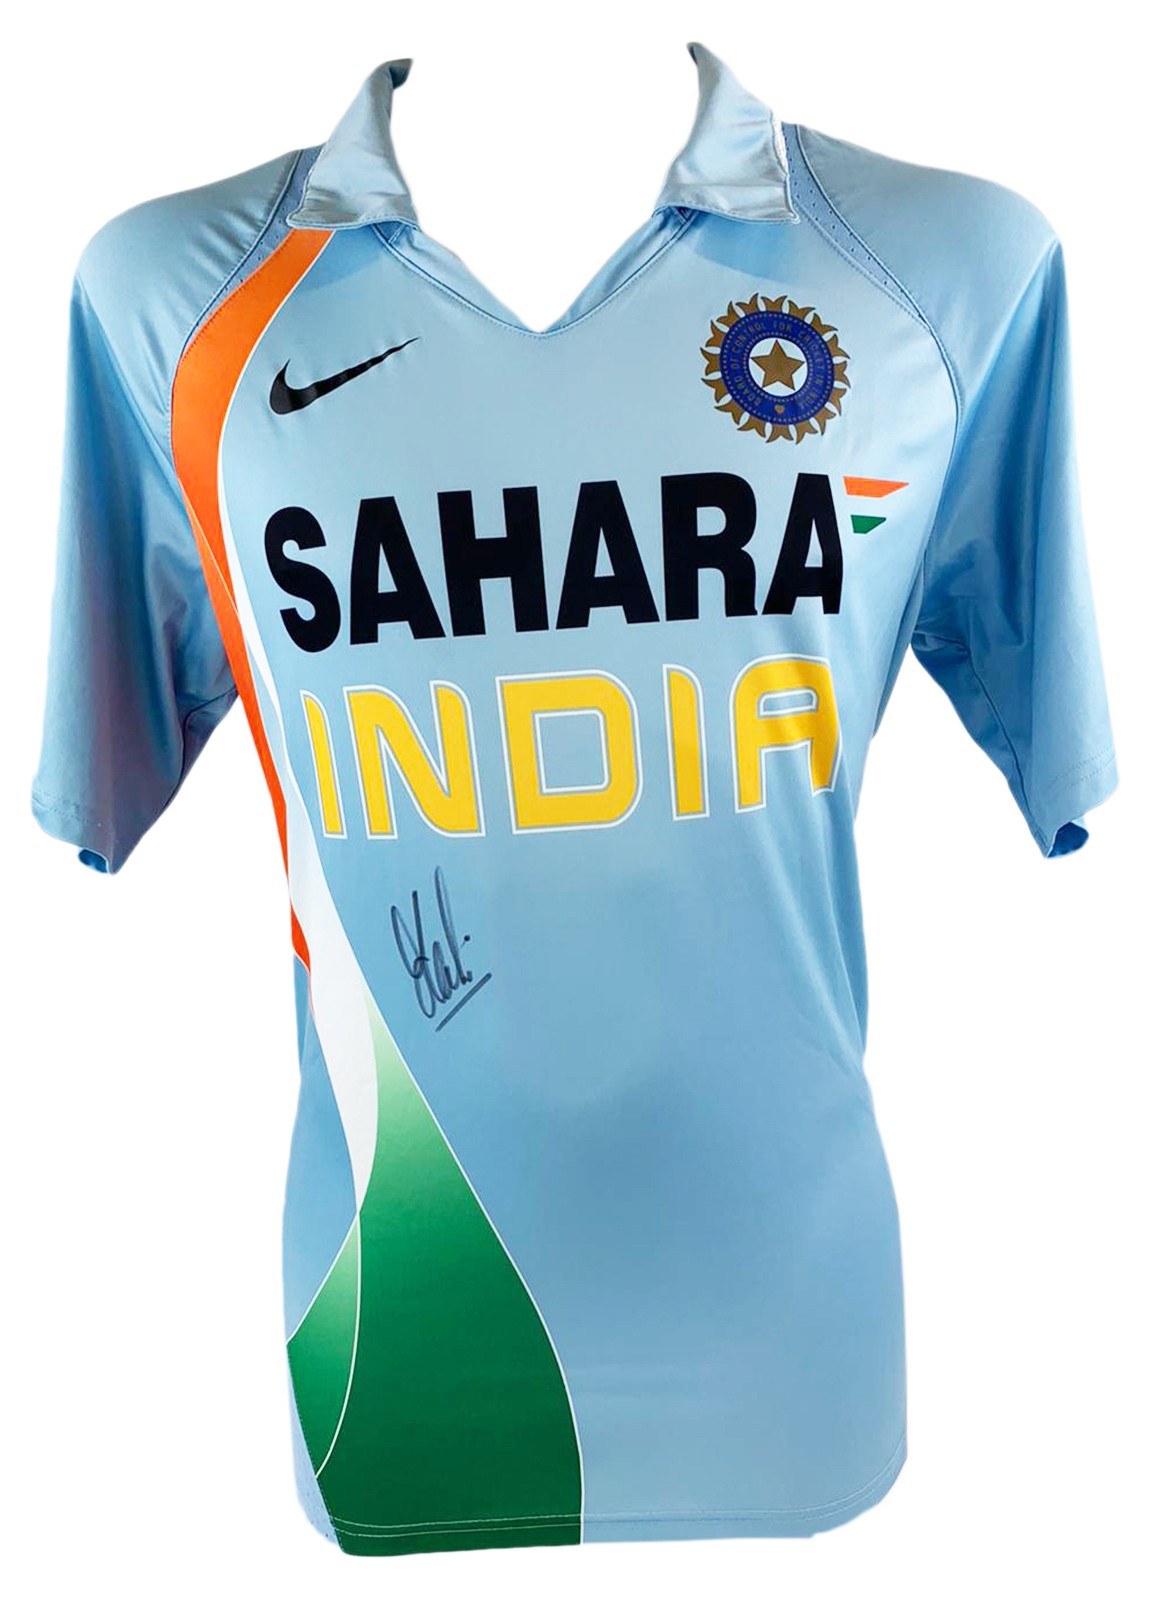 dhoni signed jersey